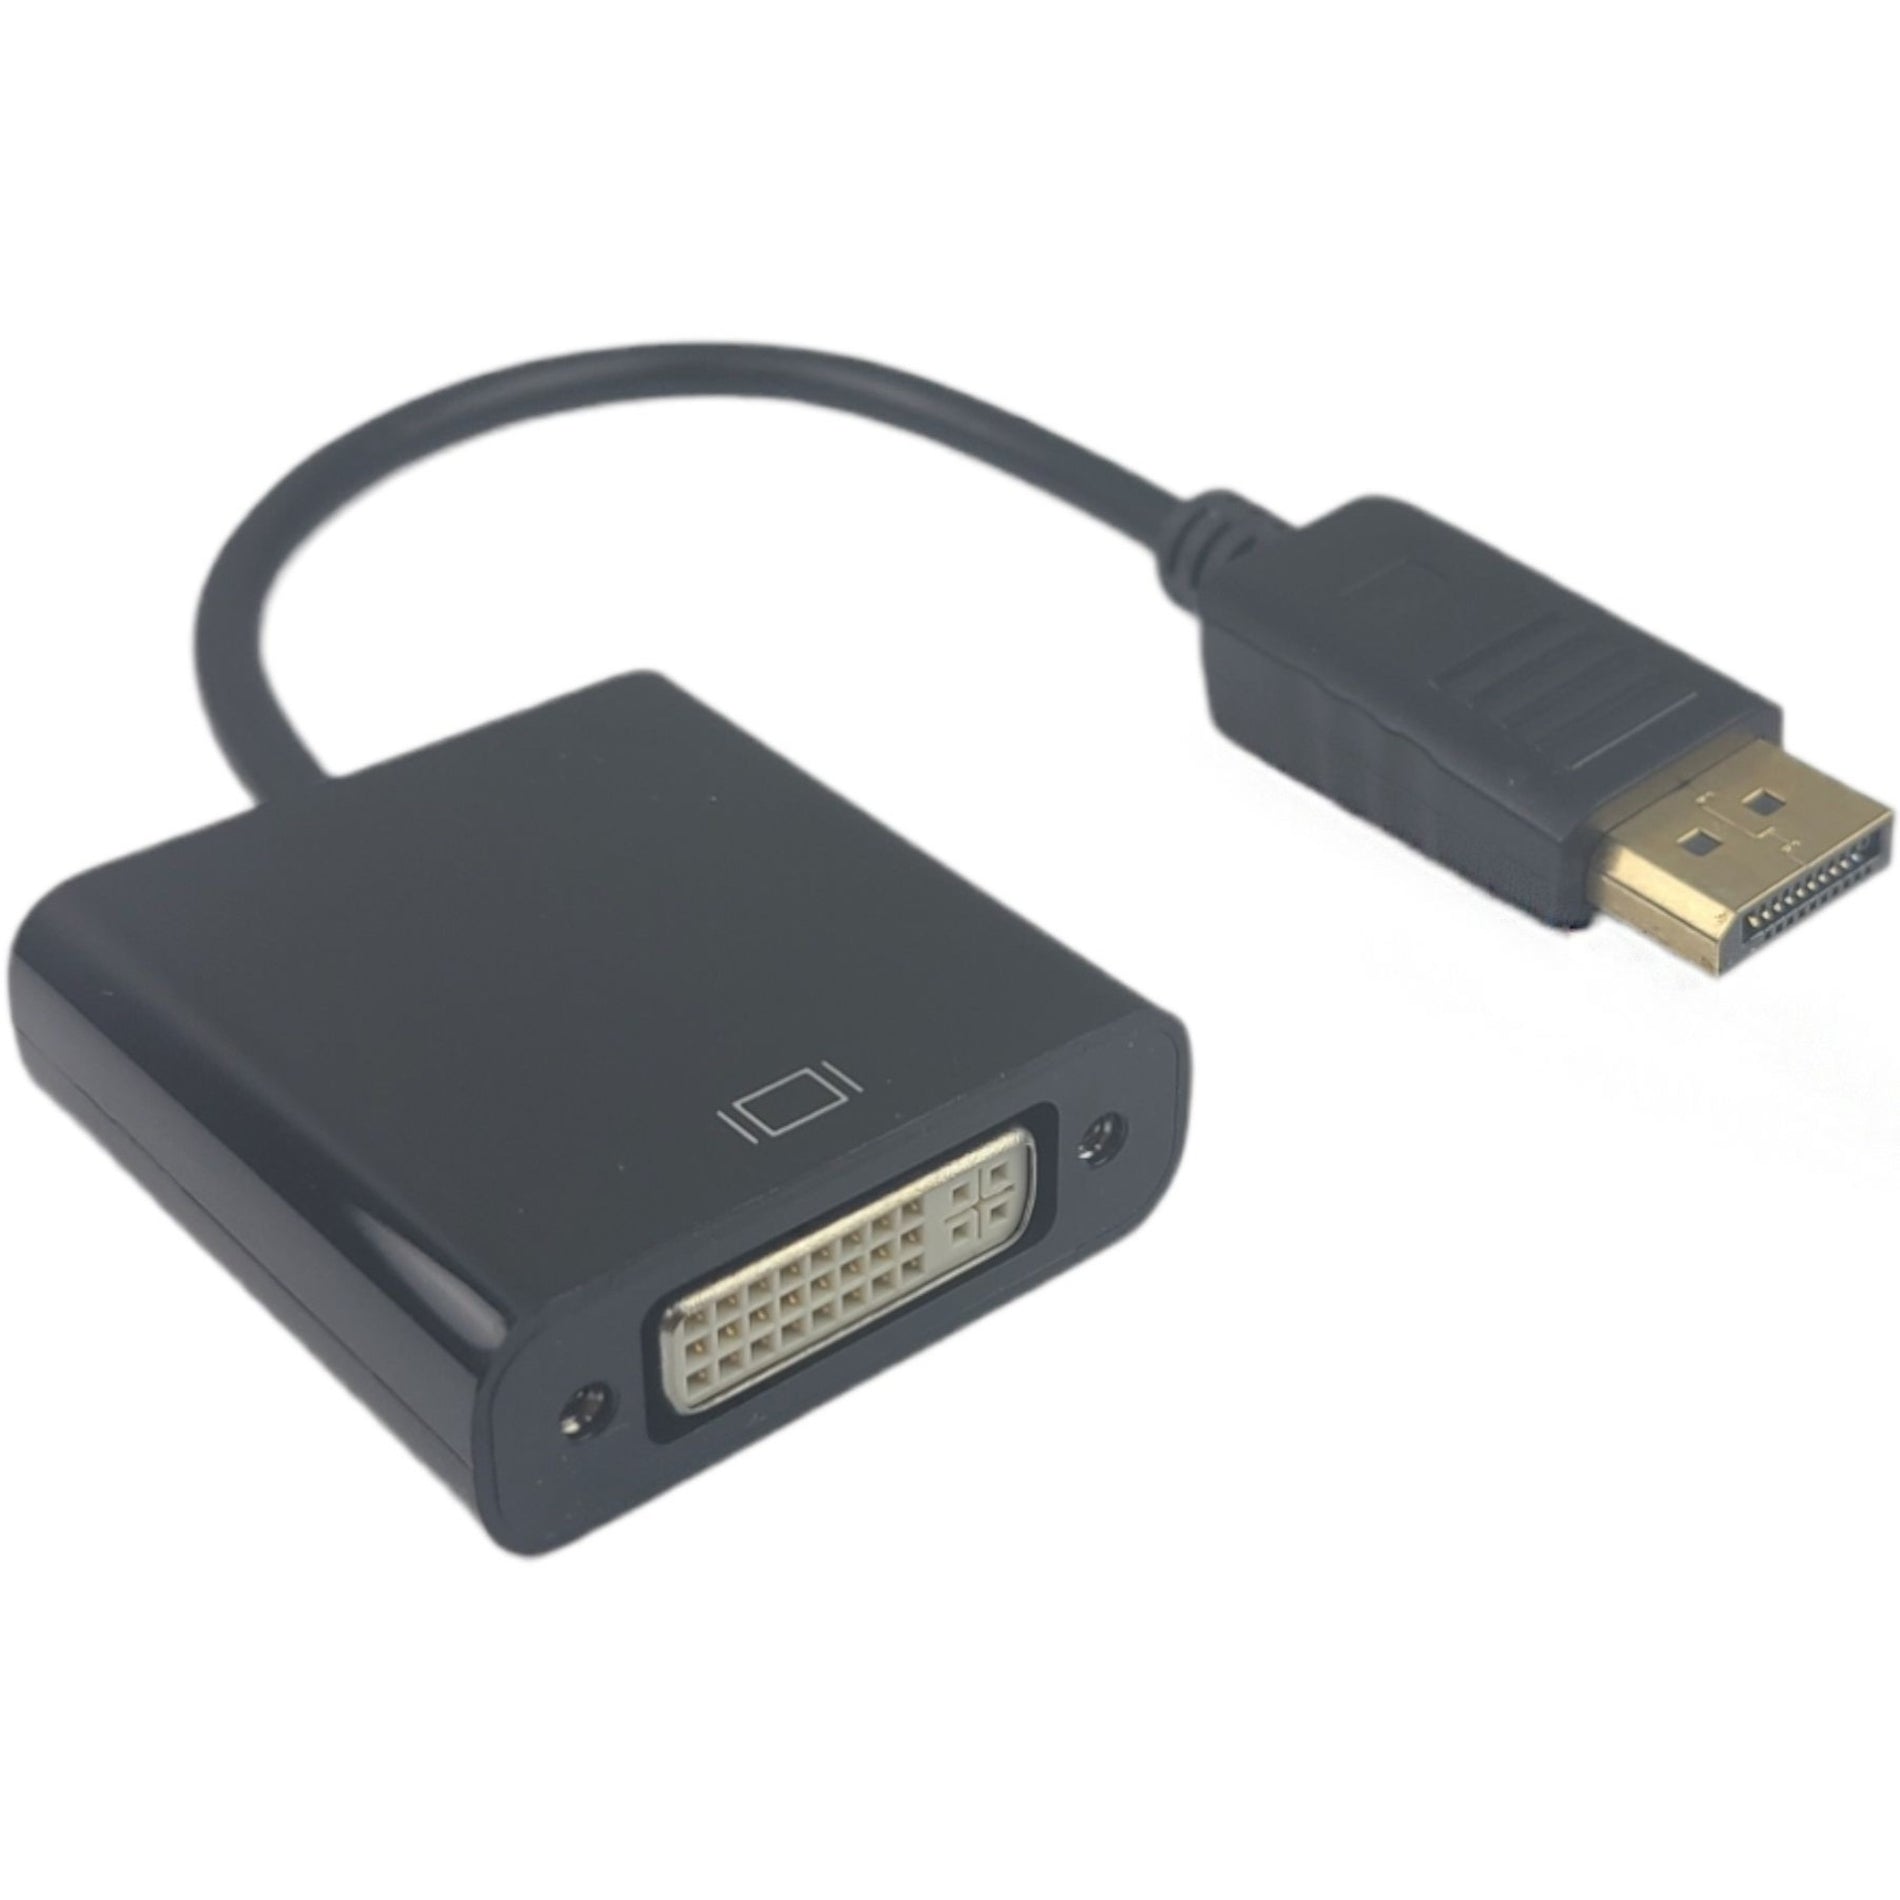 4XEM 4XDPMDVIFA10 10in DisplayPort To DVI-I Dual Link M/F Adapter Cable, Passive, 5 Gbit/s Data Transfer Rate